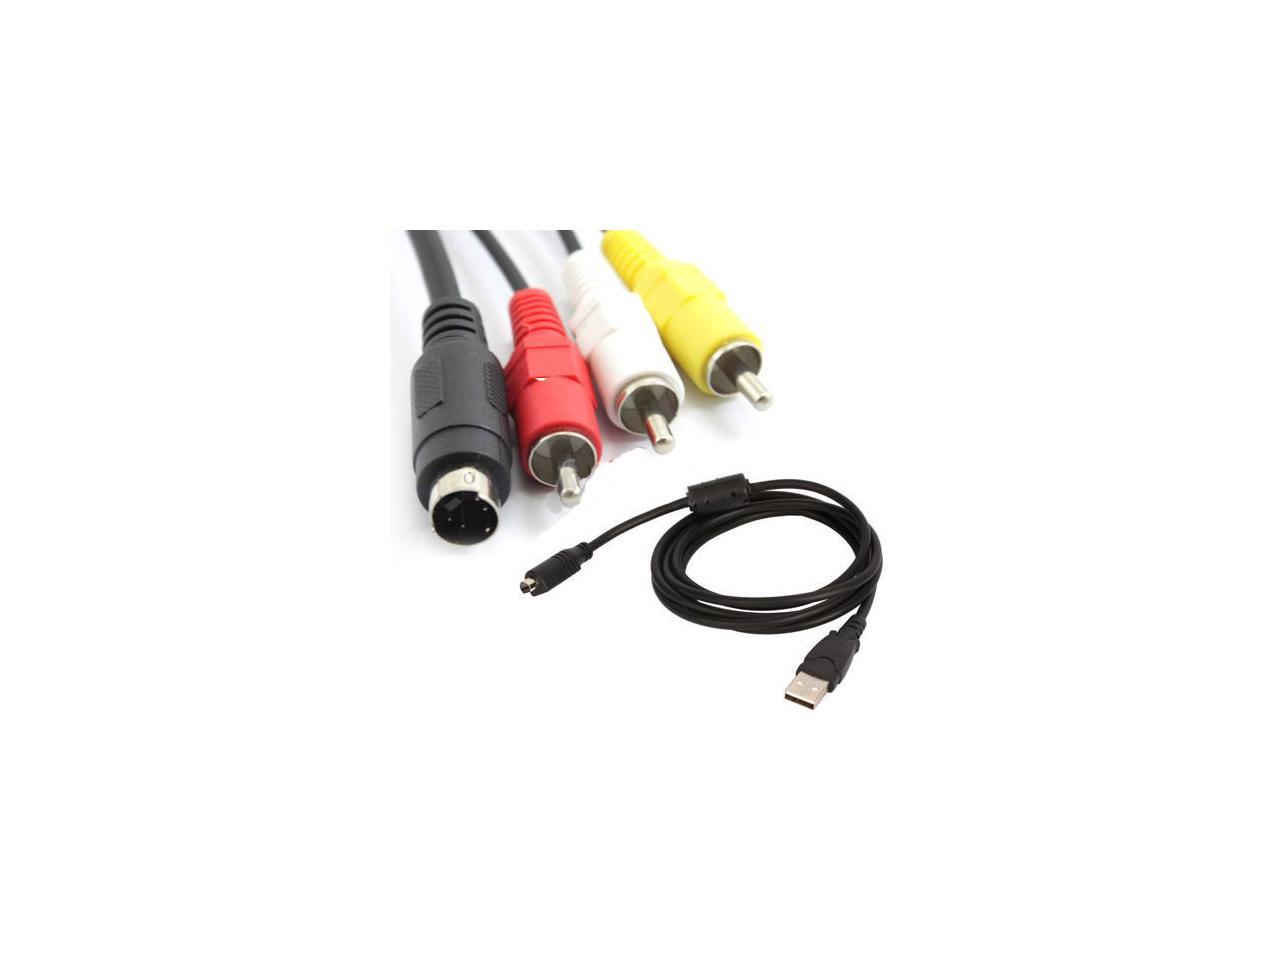 SONY  DCR-TRV480,DCR-TRV480E CAMERA USB DATA SYNC CABLE LEAD FOR PC AND MAC 